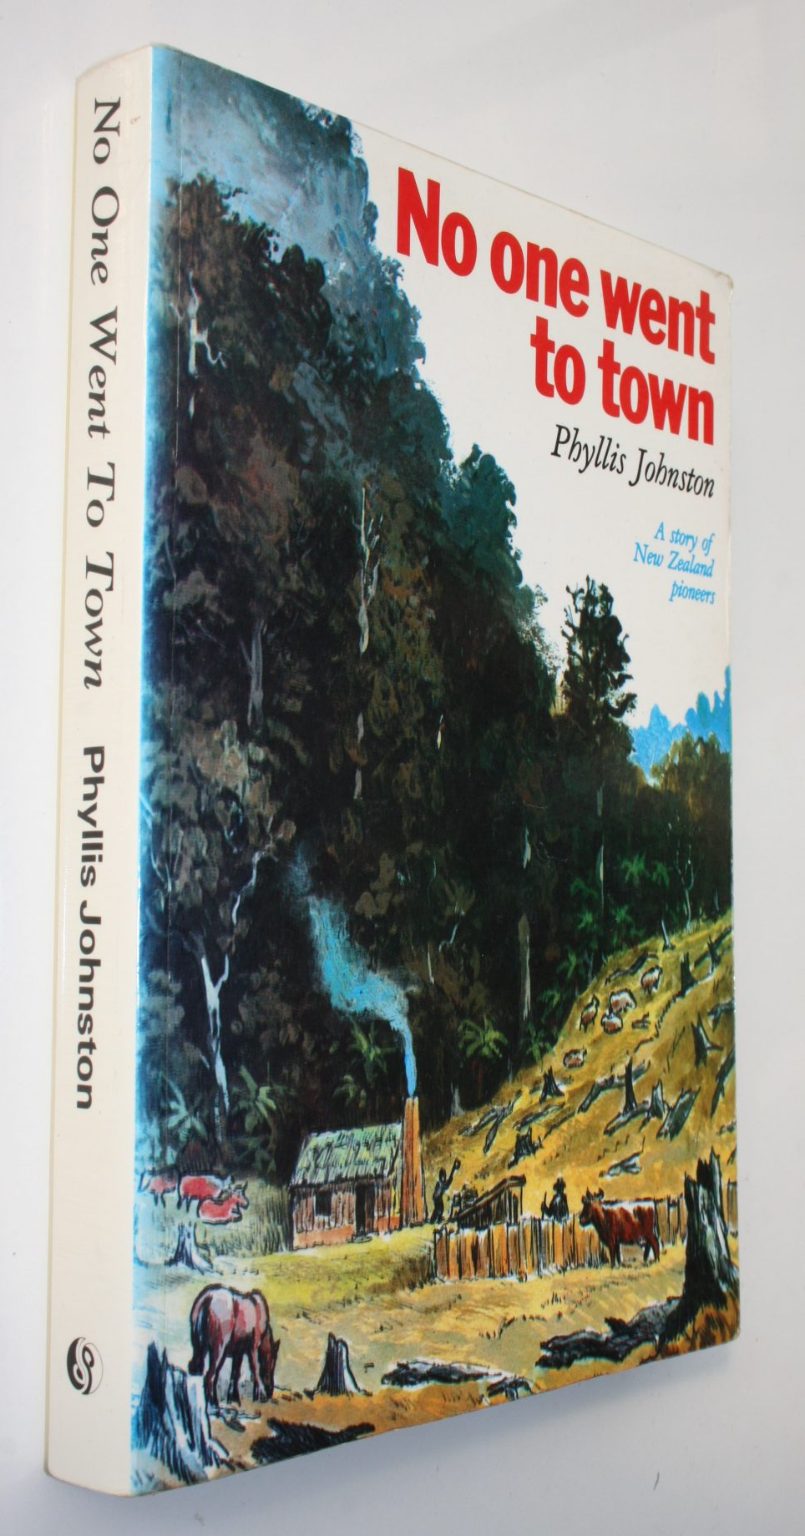 No One Went To Town by Phyllis Johnston (SIGNED by author)